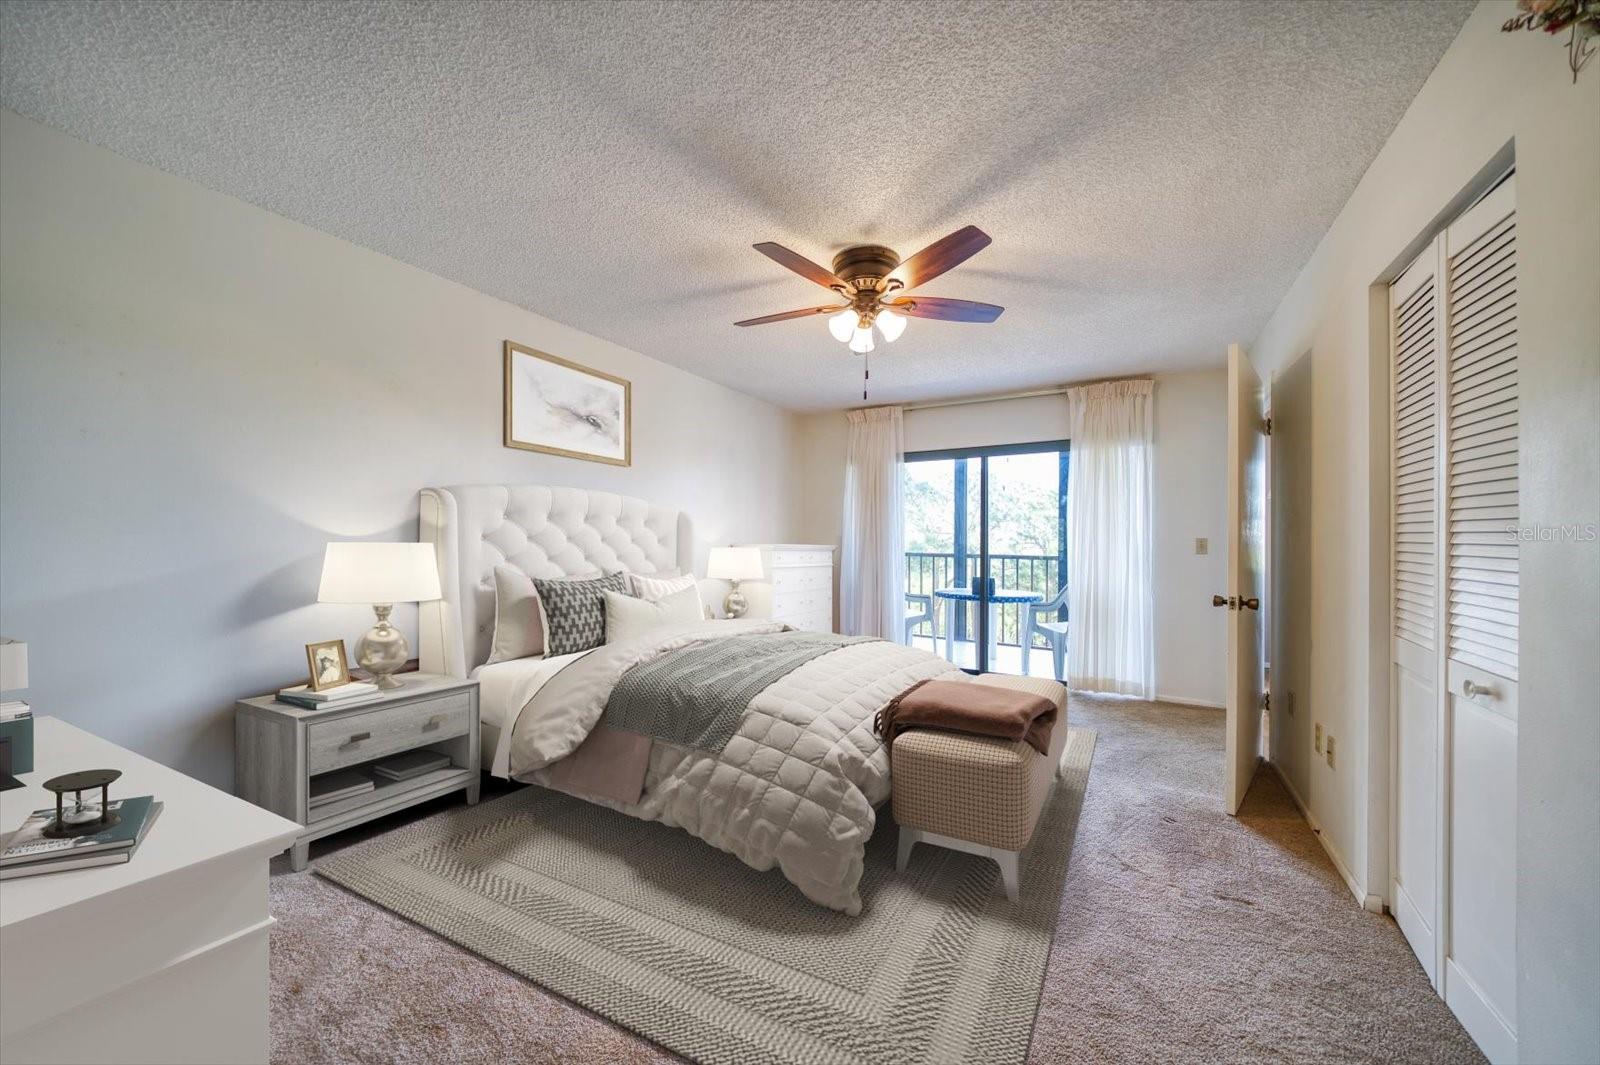 Primary Bedroom virtual staging